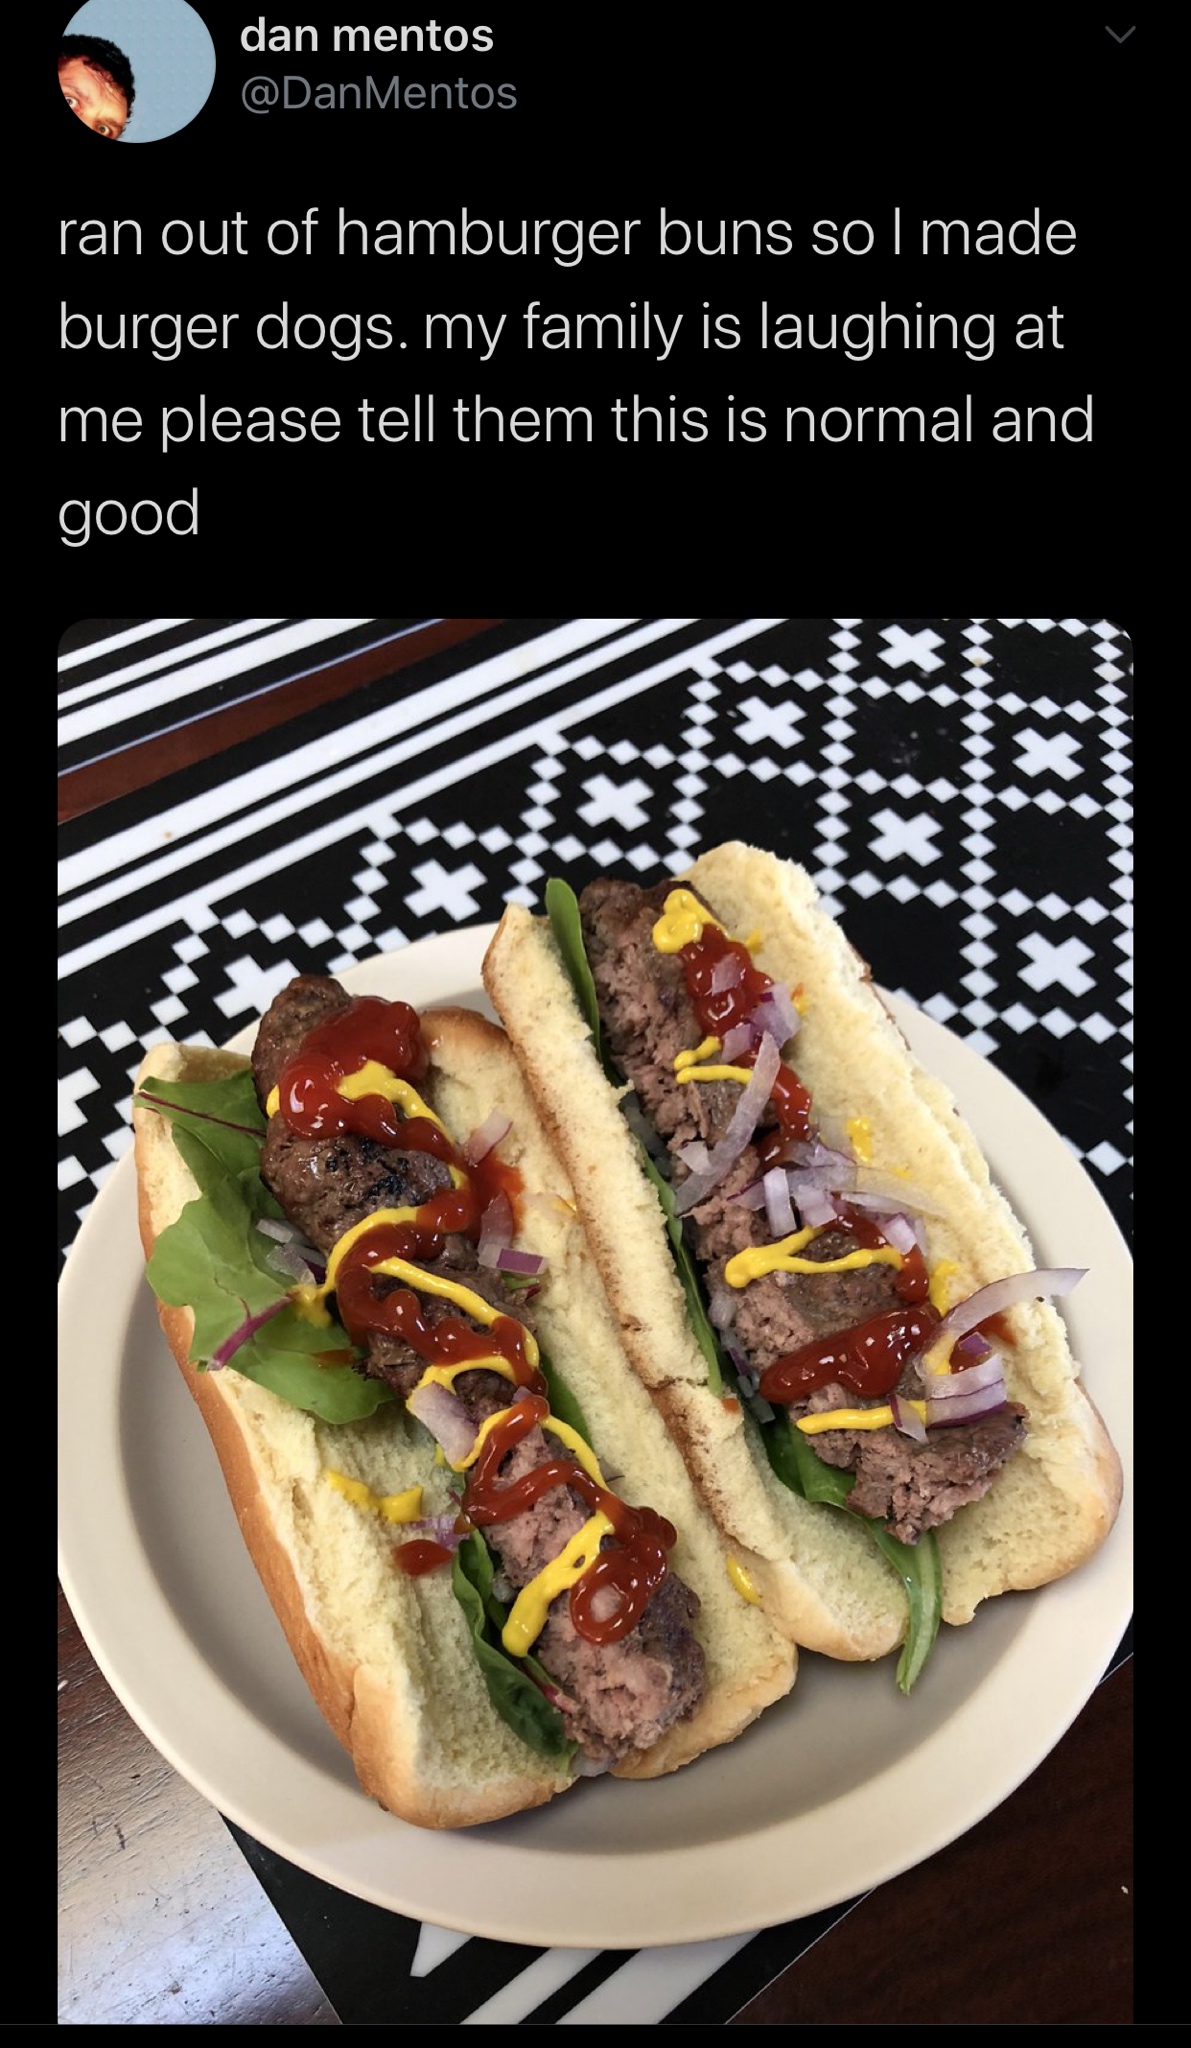 gucci - dan mentos ran out of hamburger buns so I made burger dogs. my family is laughing at me please tell them this is normal and good